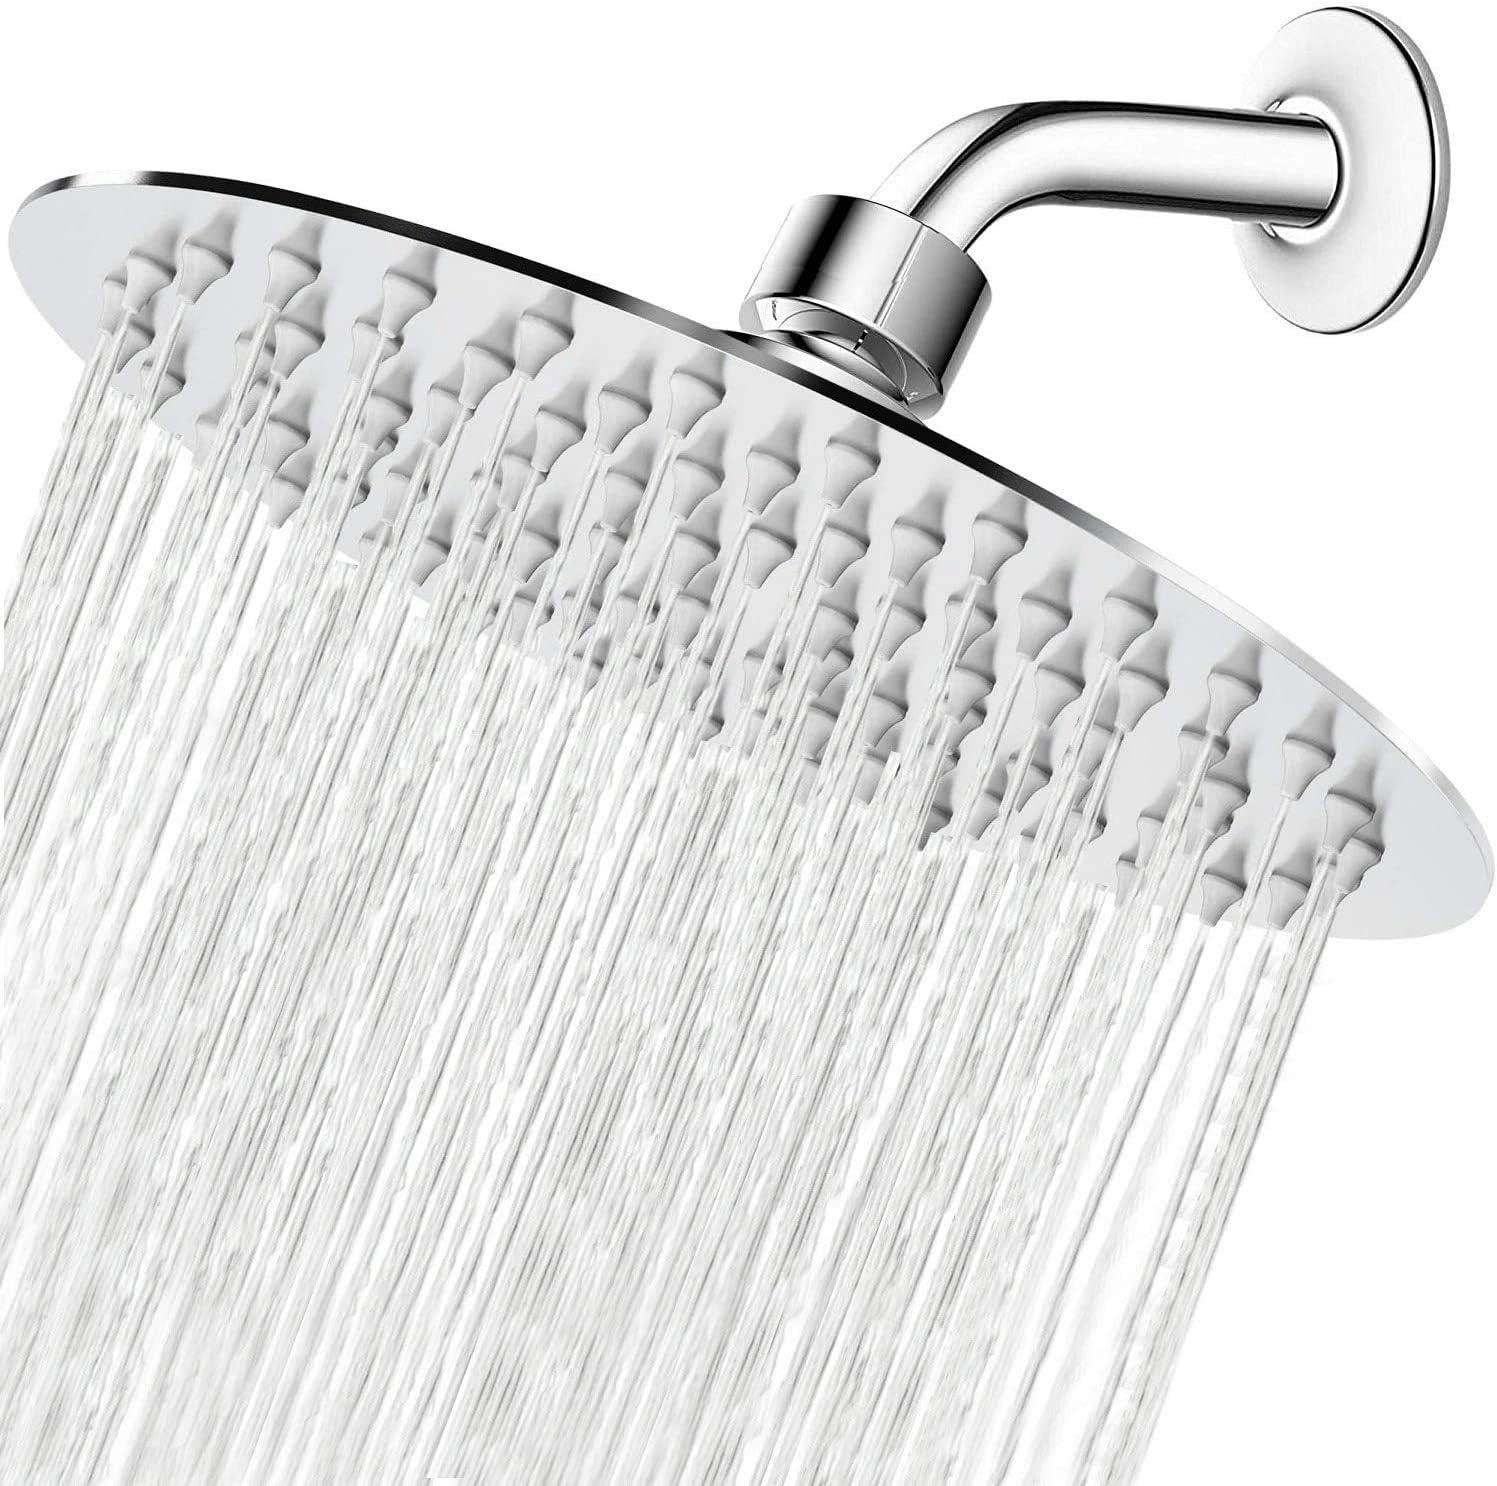 Simple, inexpensive and functional shower head. I like that the openings are rubber to help avoid build up and maintain the water pressure.